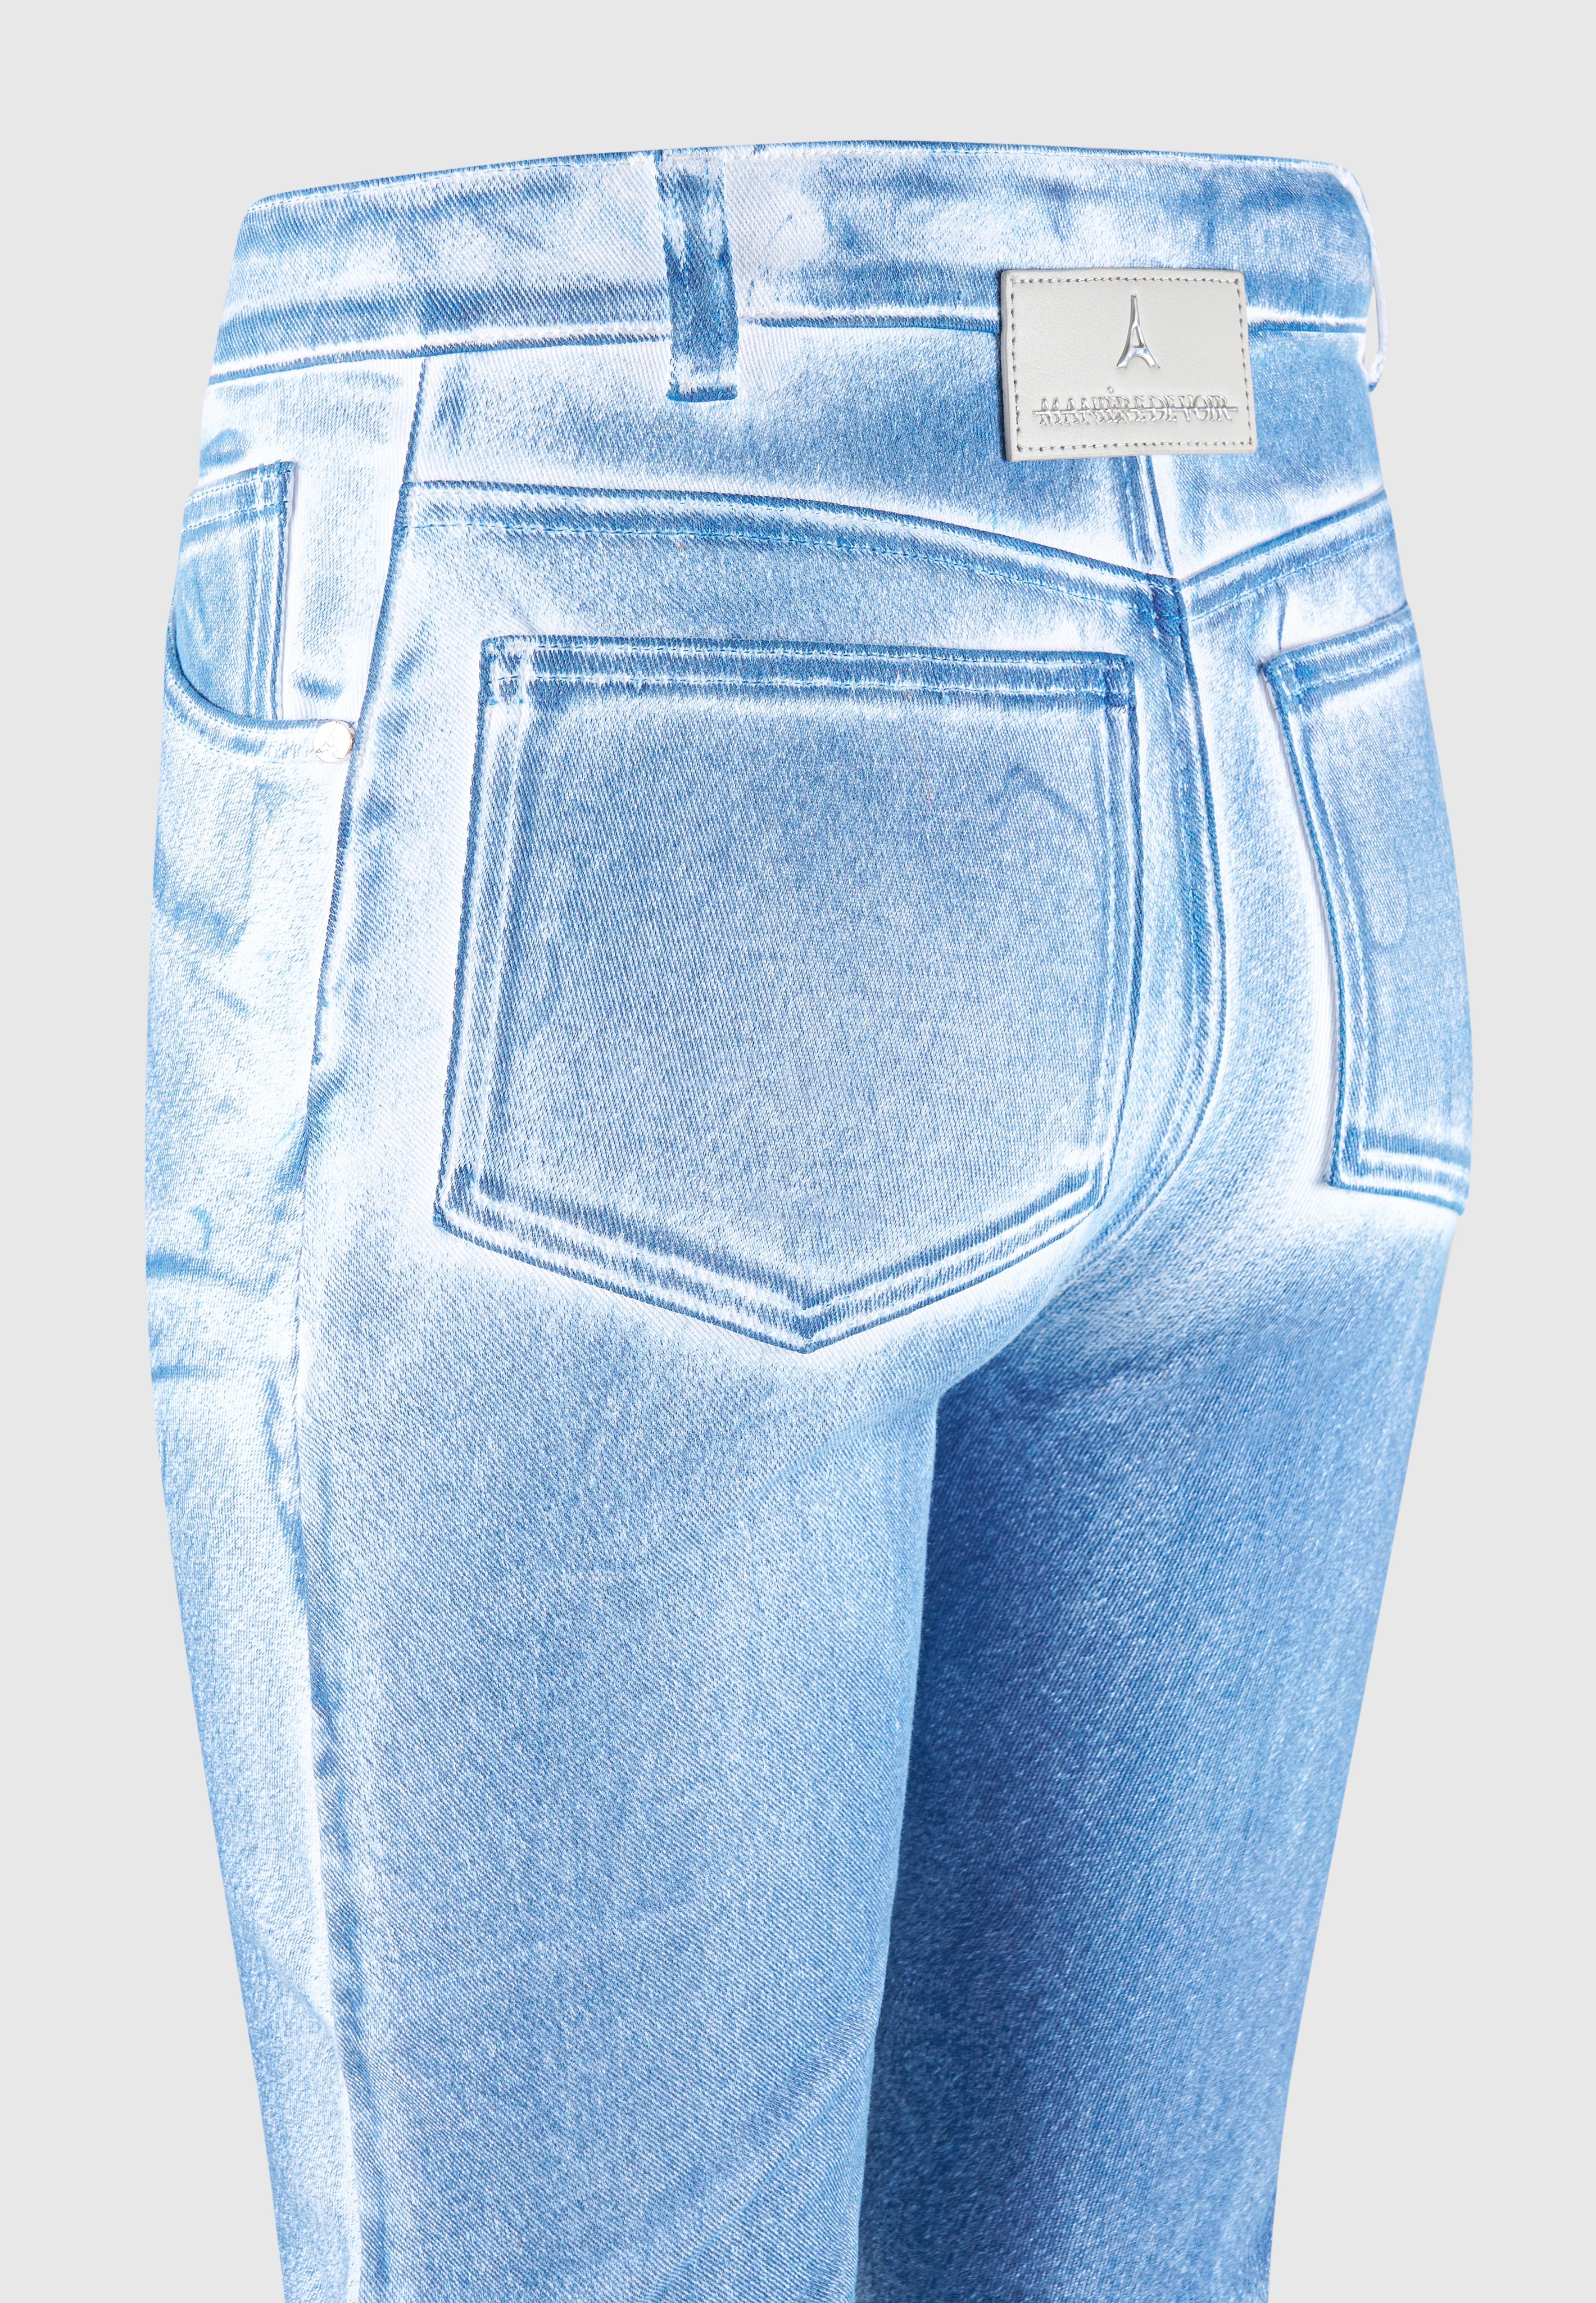 denim-effect-tacked-fit-and-flare-jeans-blue-white